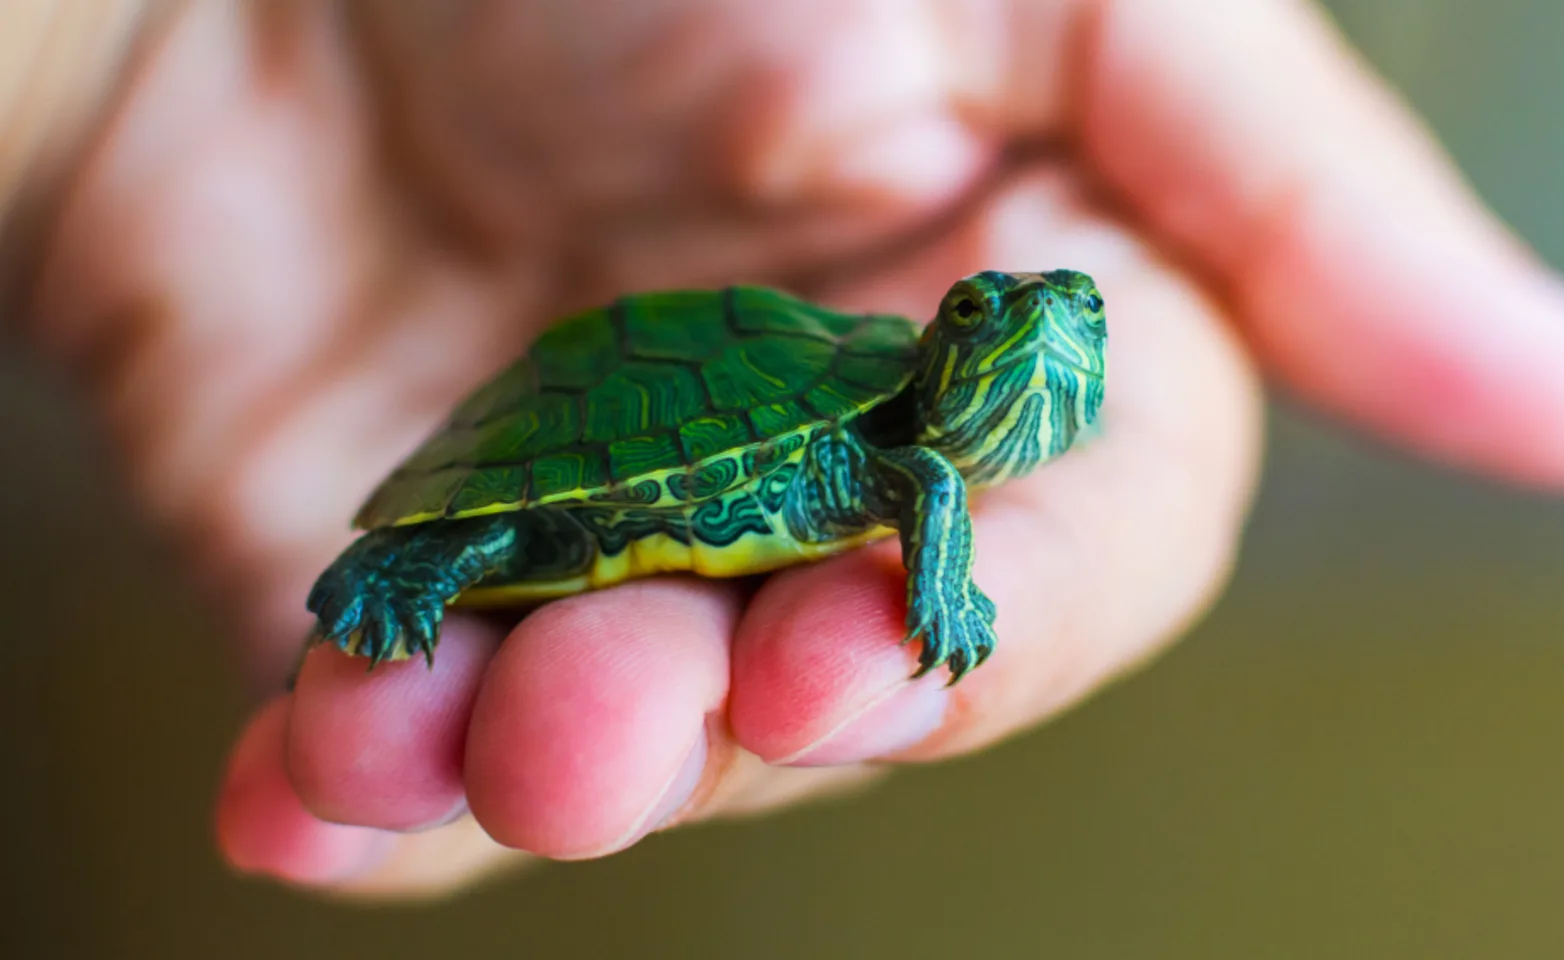 Turtle sitting in a person's hand